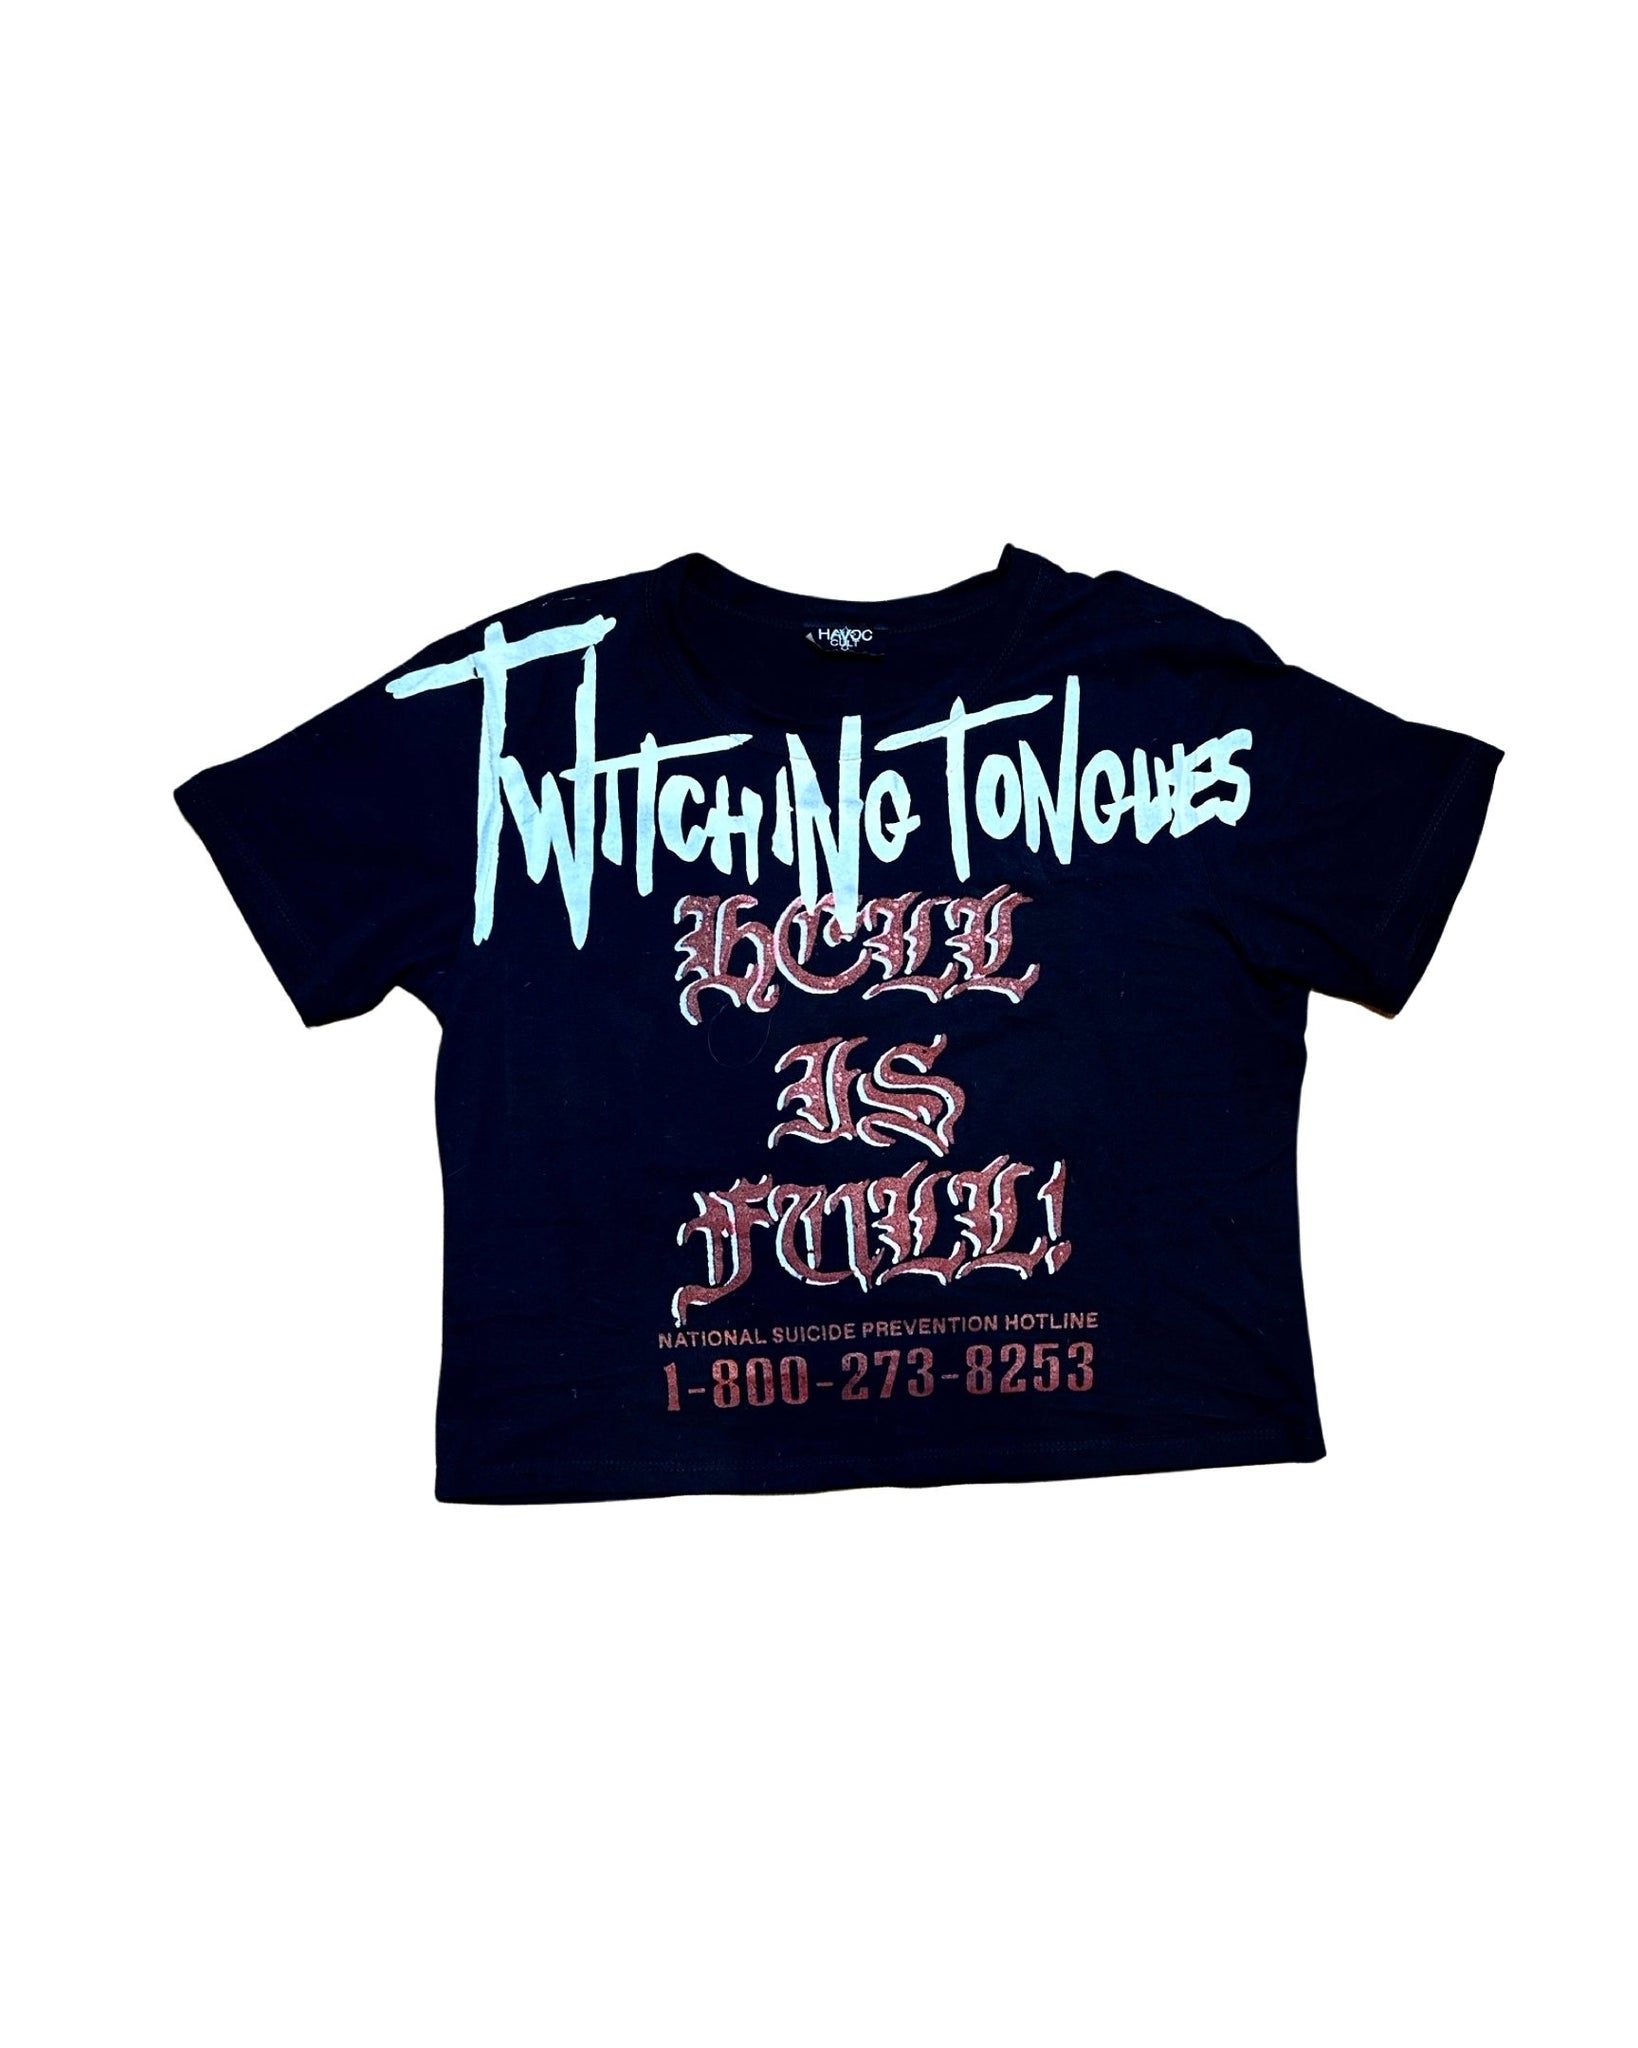 TWITCHING TONGUES X HAVOC BABY TEE